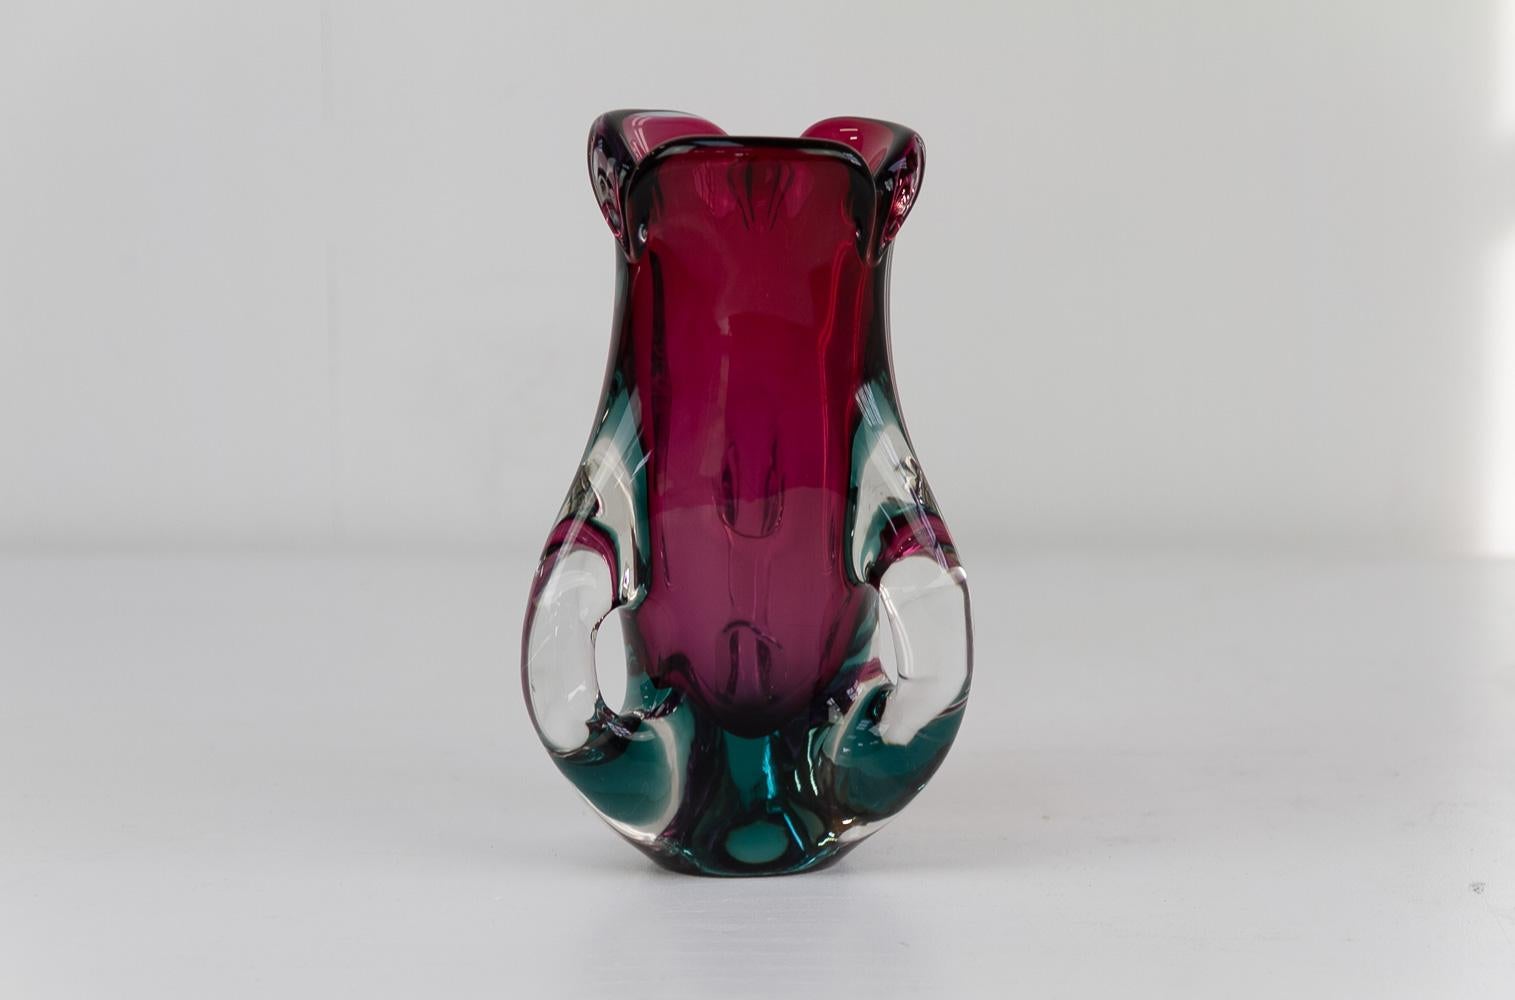 Italian Mid-Century Modern Purple and Green Murano Glass Vase, 1960s.
This vase is made in Sommerso Murano glass and has been hand blown in clear, green and purple glass in Italy in the 1960s. 
Beautiful organic expression.

Very good condition. No